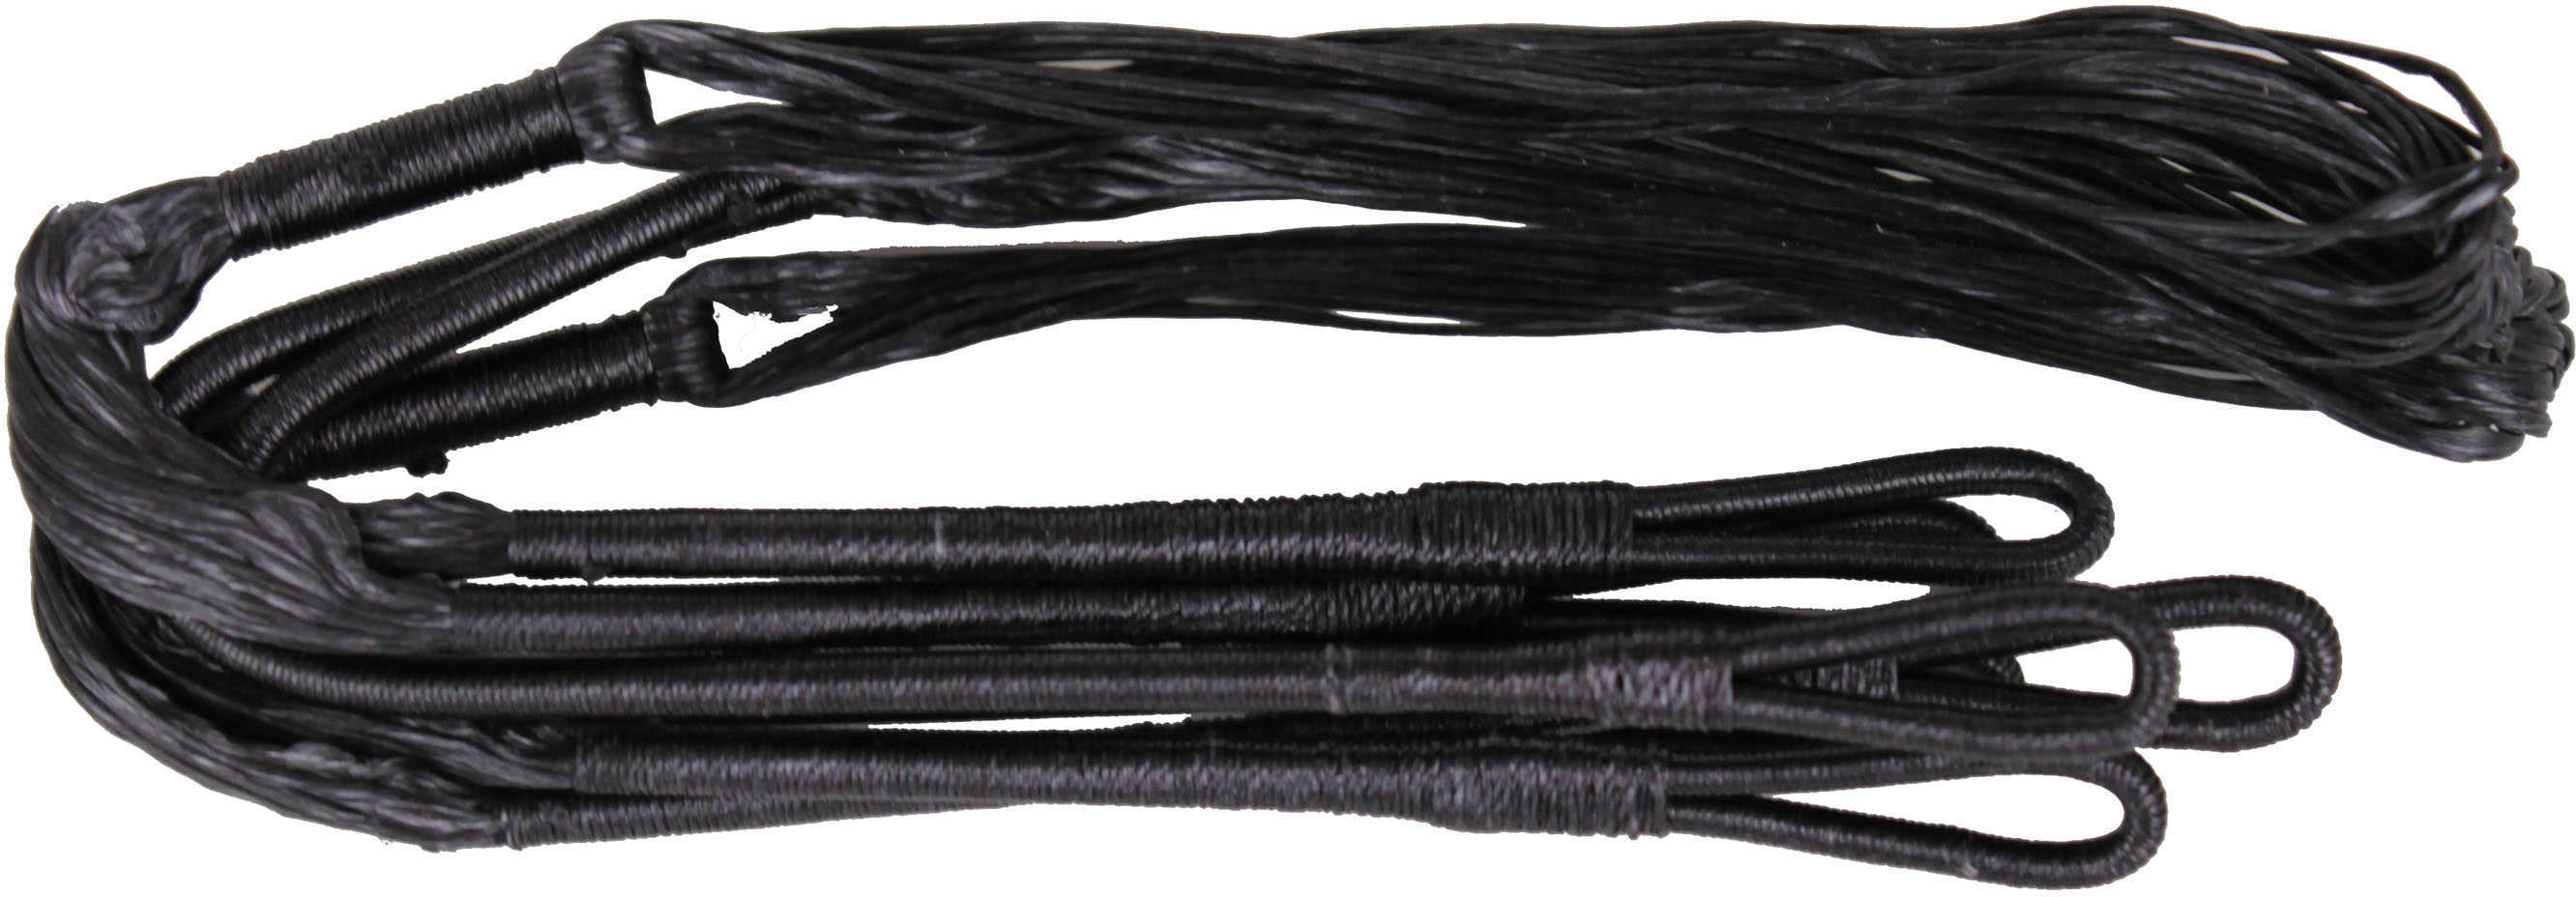 TenPoint Crossbow Technologies Replacement Cables Carbon Elite XLT,Tact XLT,Stealth SS, 2 Pack HCA-12912